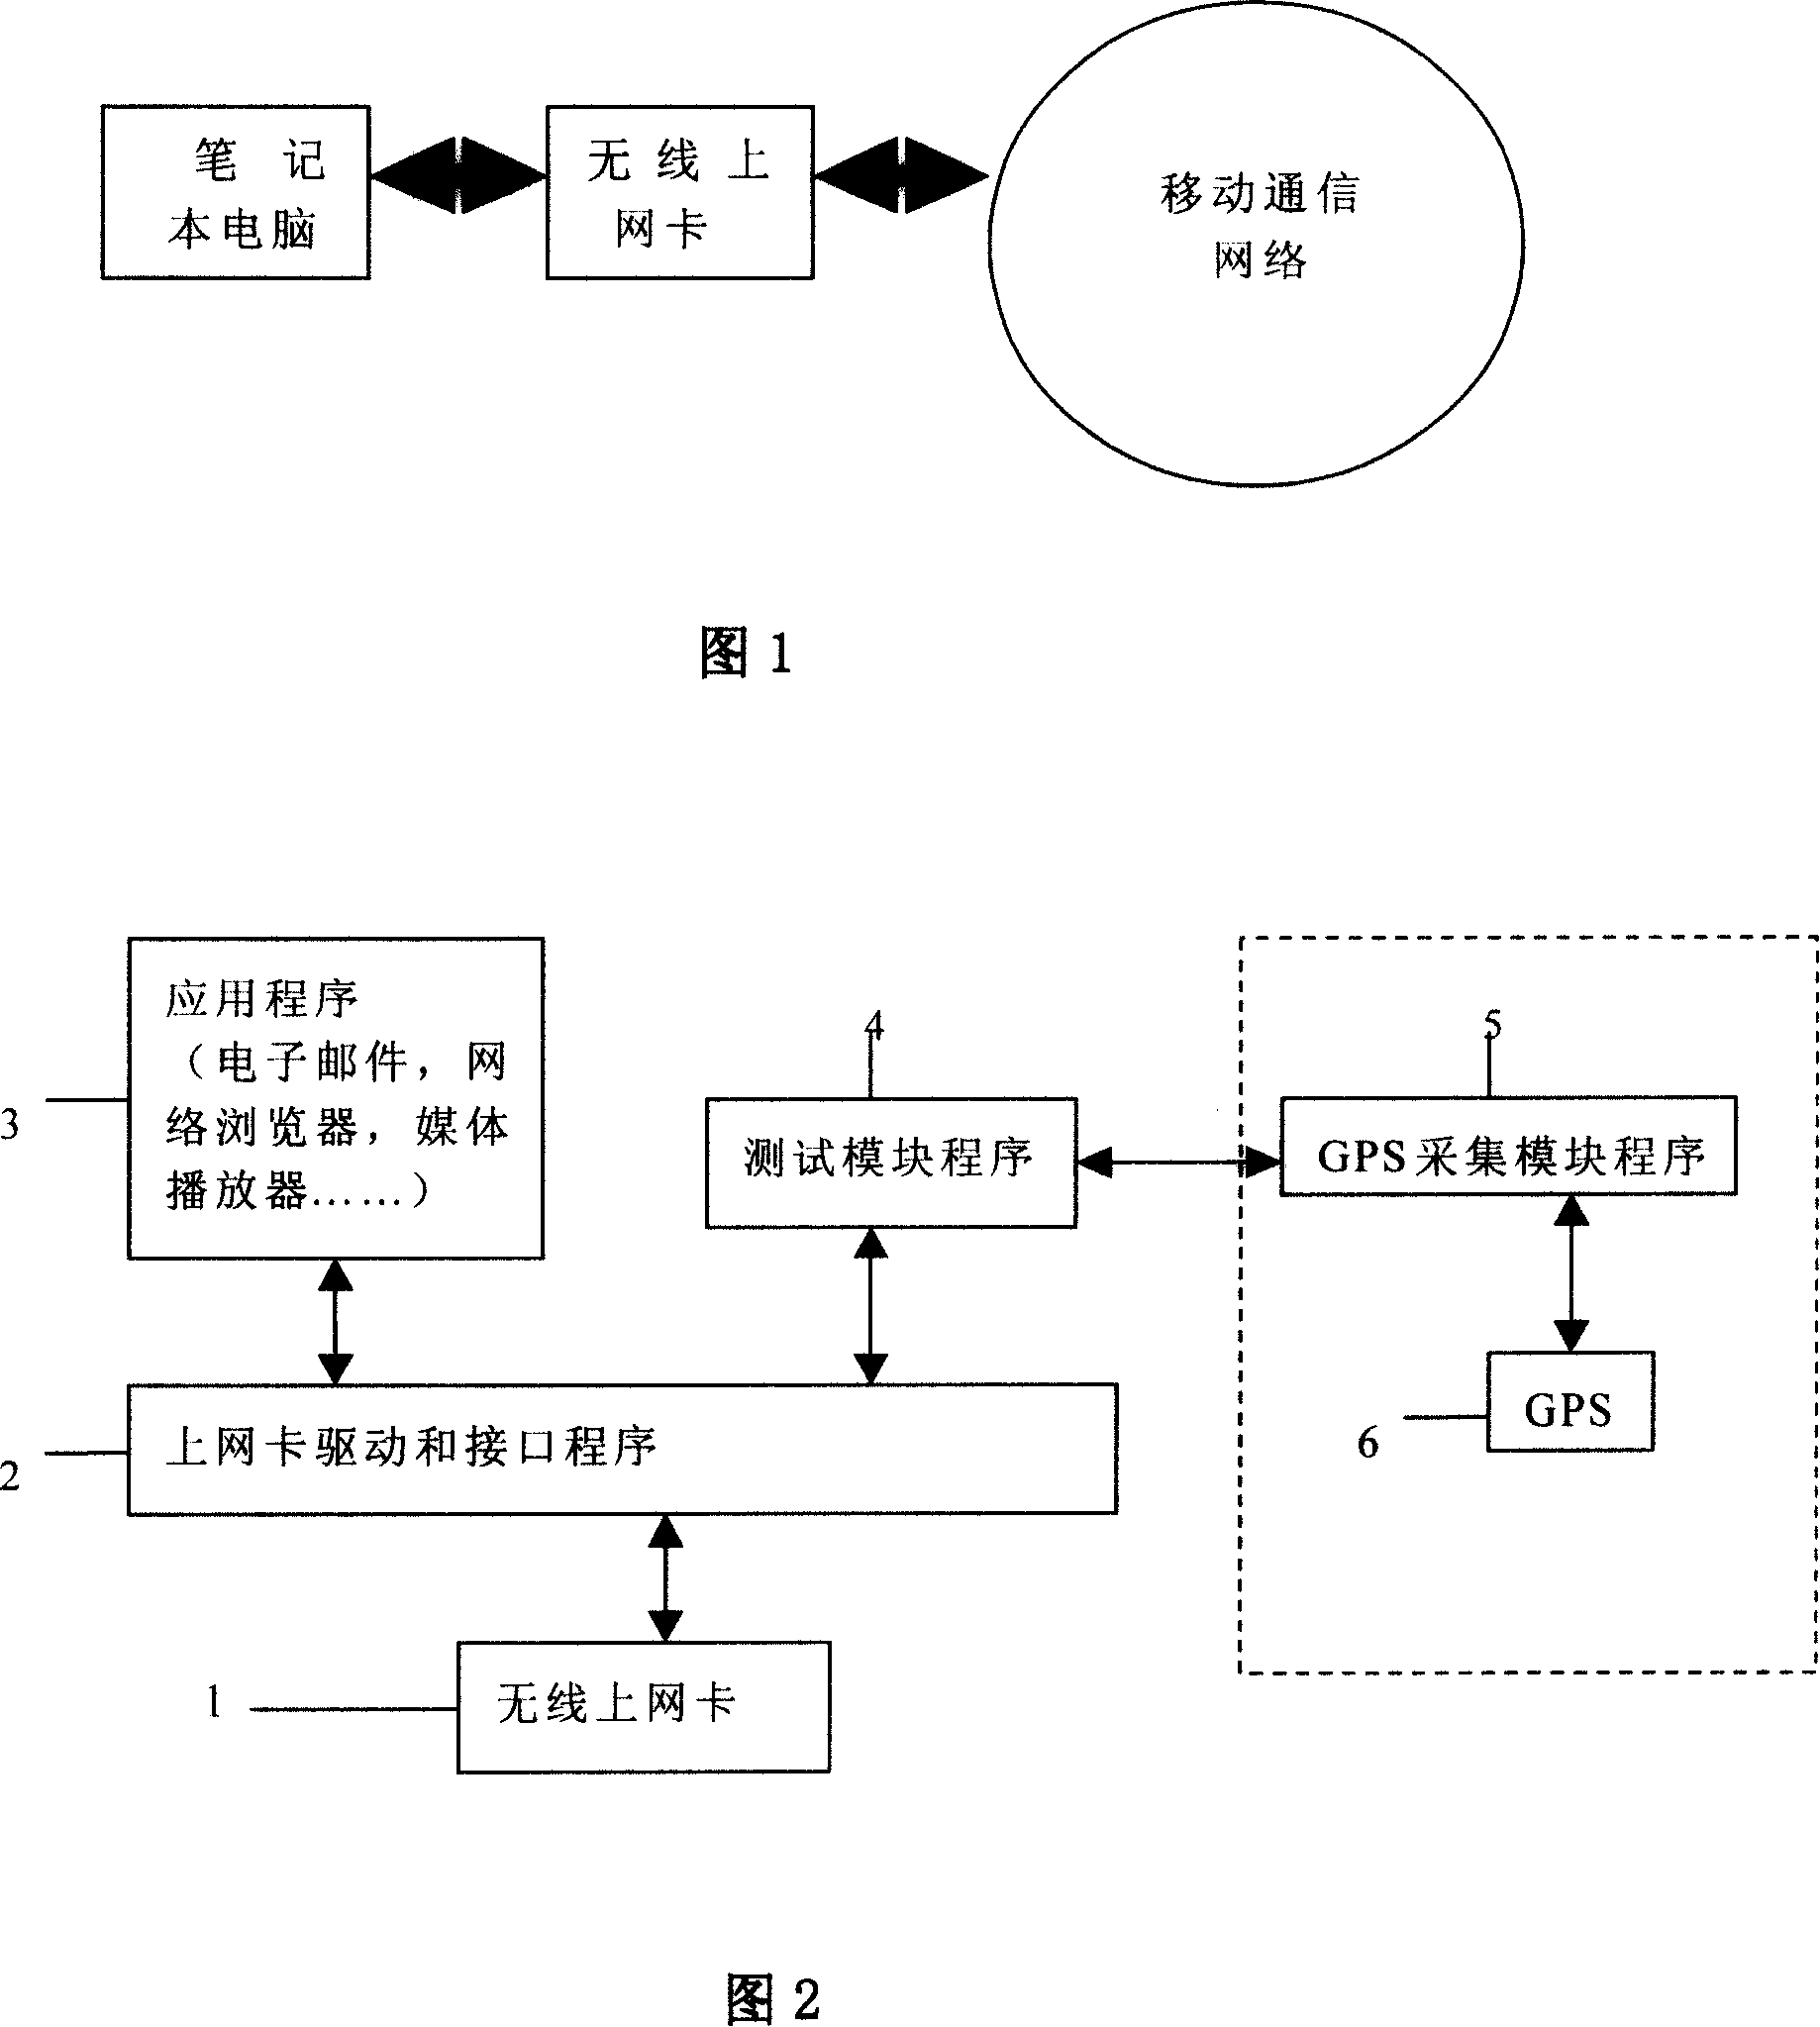 Method for testing the communication network via the wireless network card